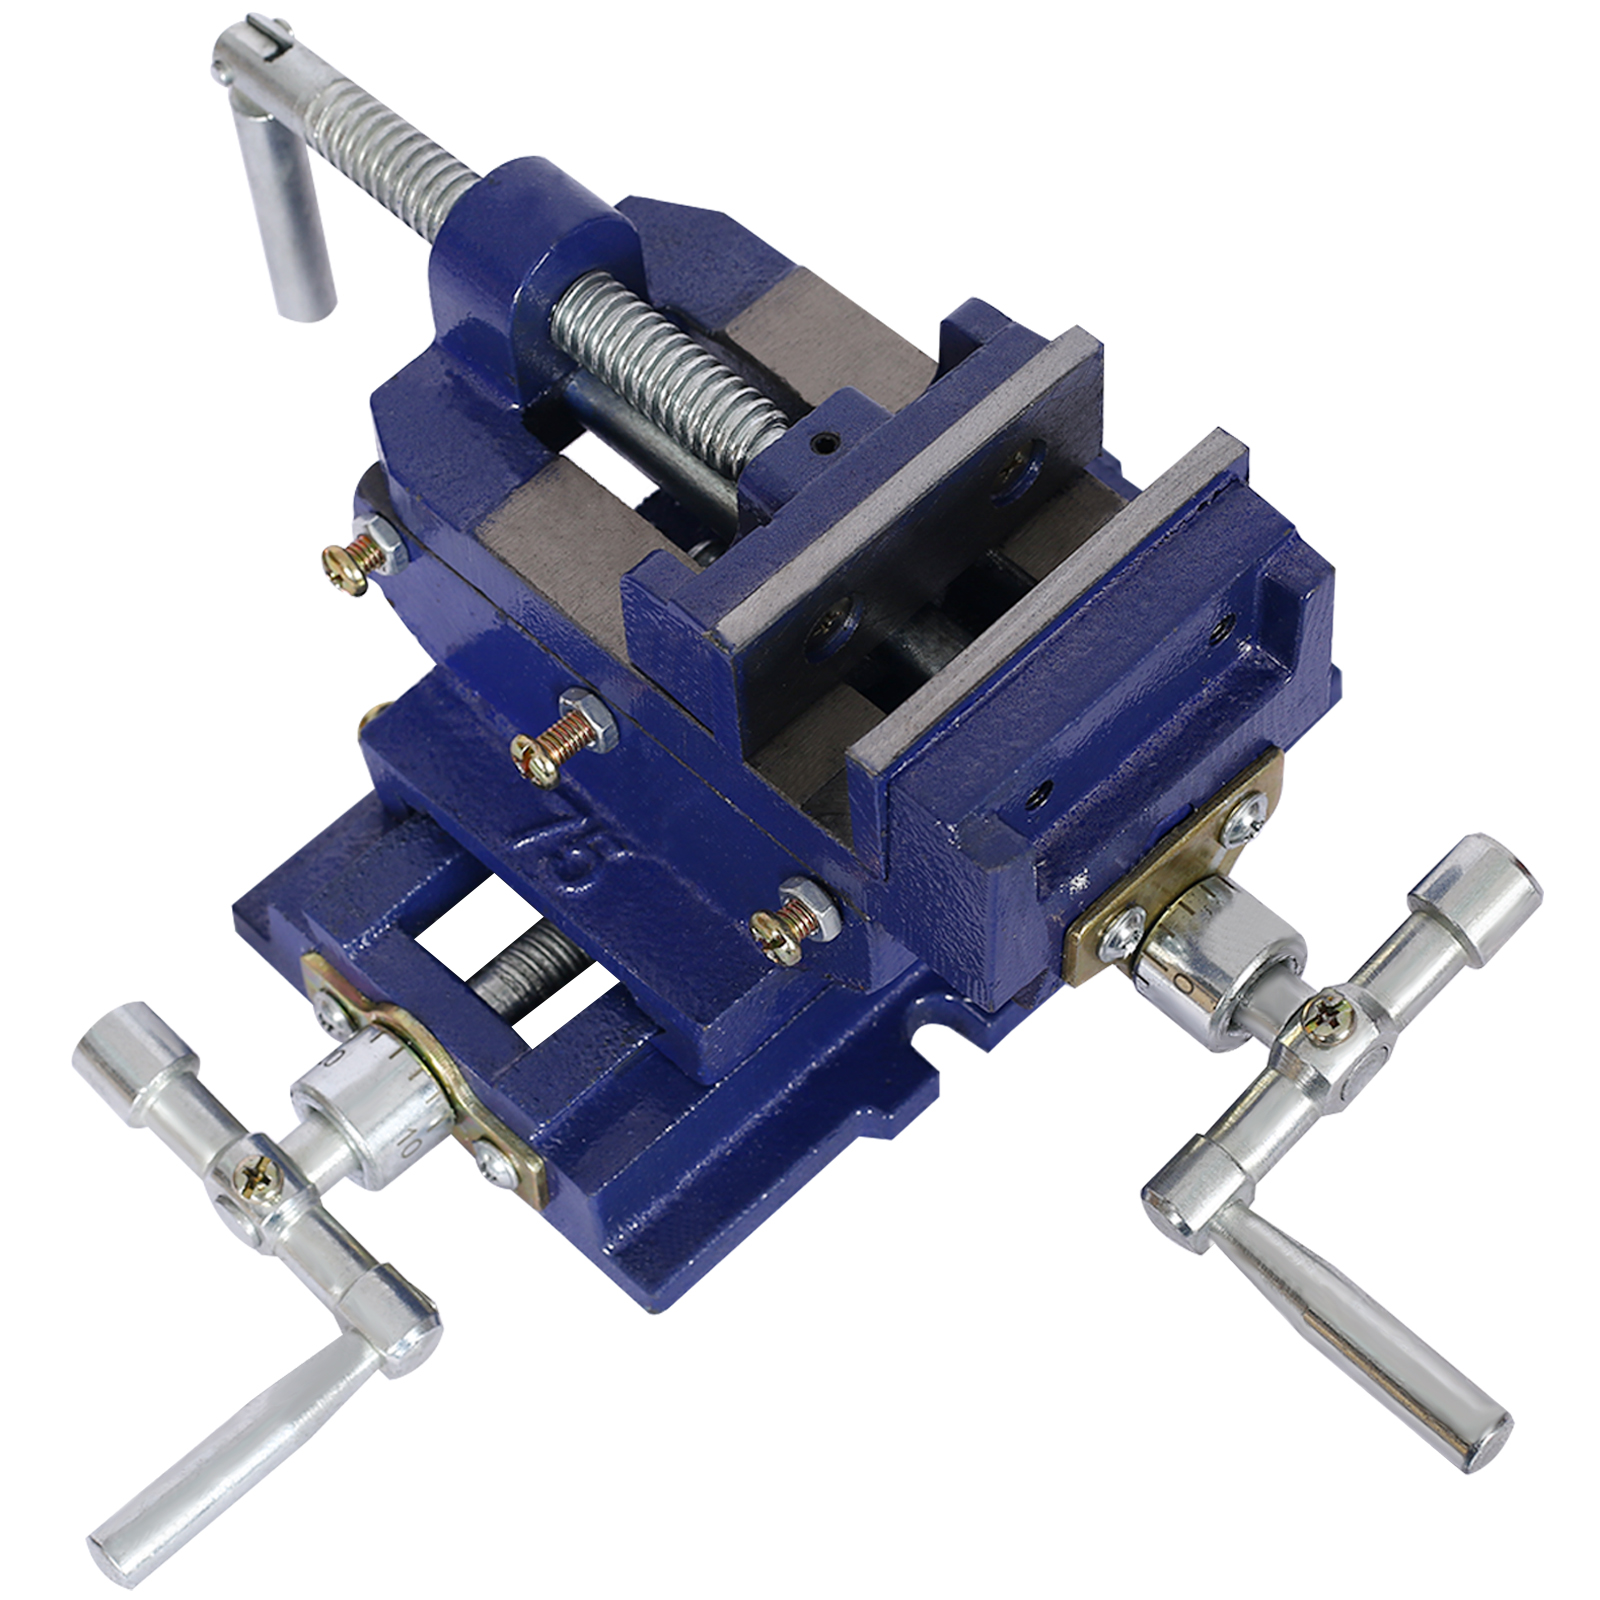 Cross slide vise, Drill Press Vise 3inch,drill press metal milling 2 way X-Y ,benchtop wood working clamp machine-CASAINC